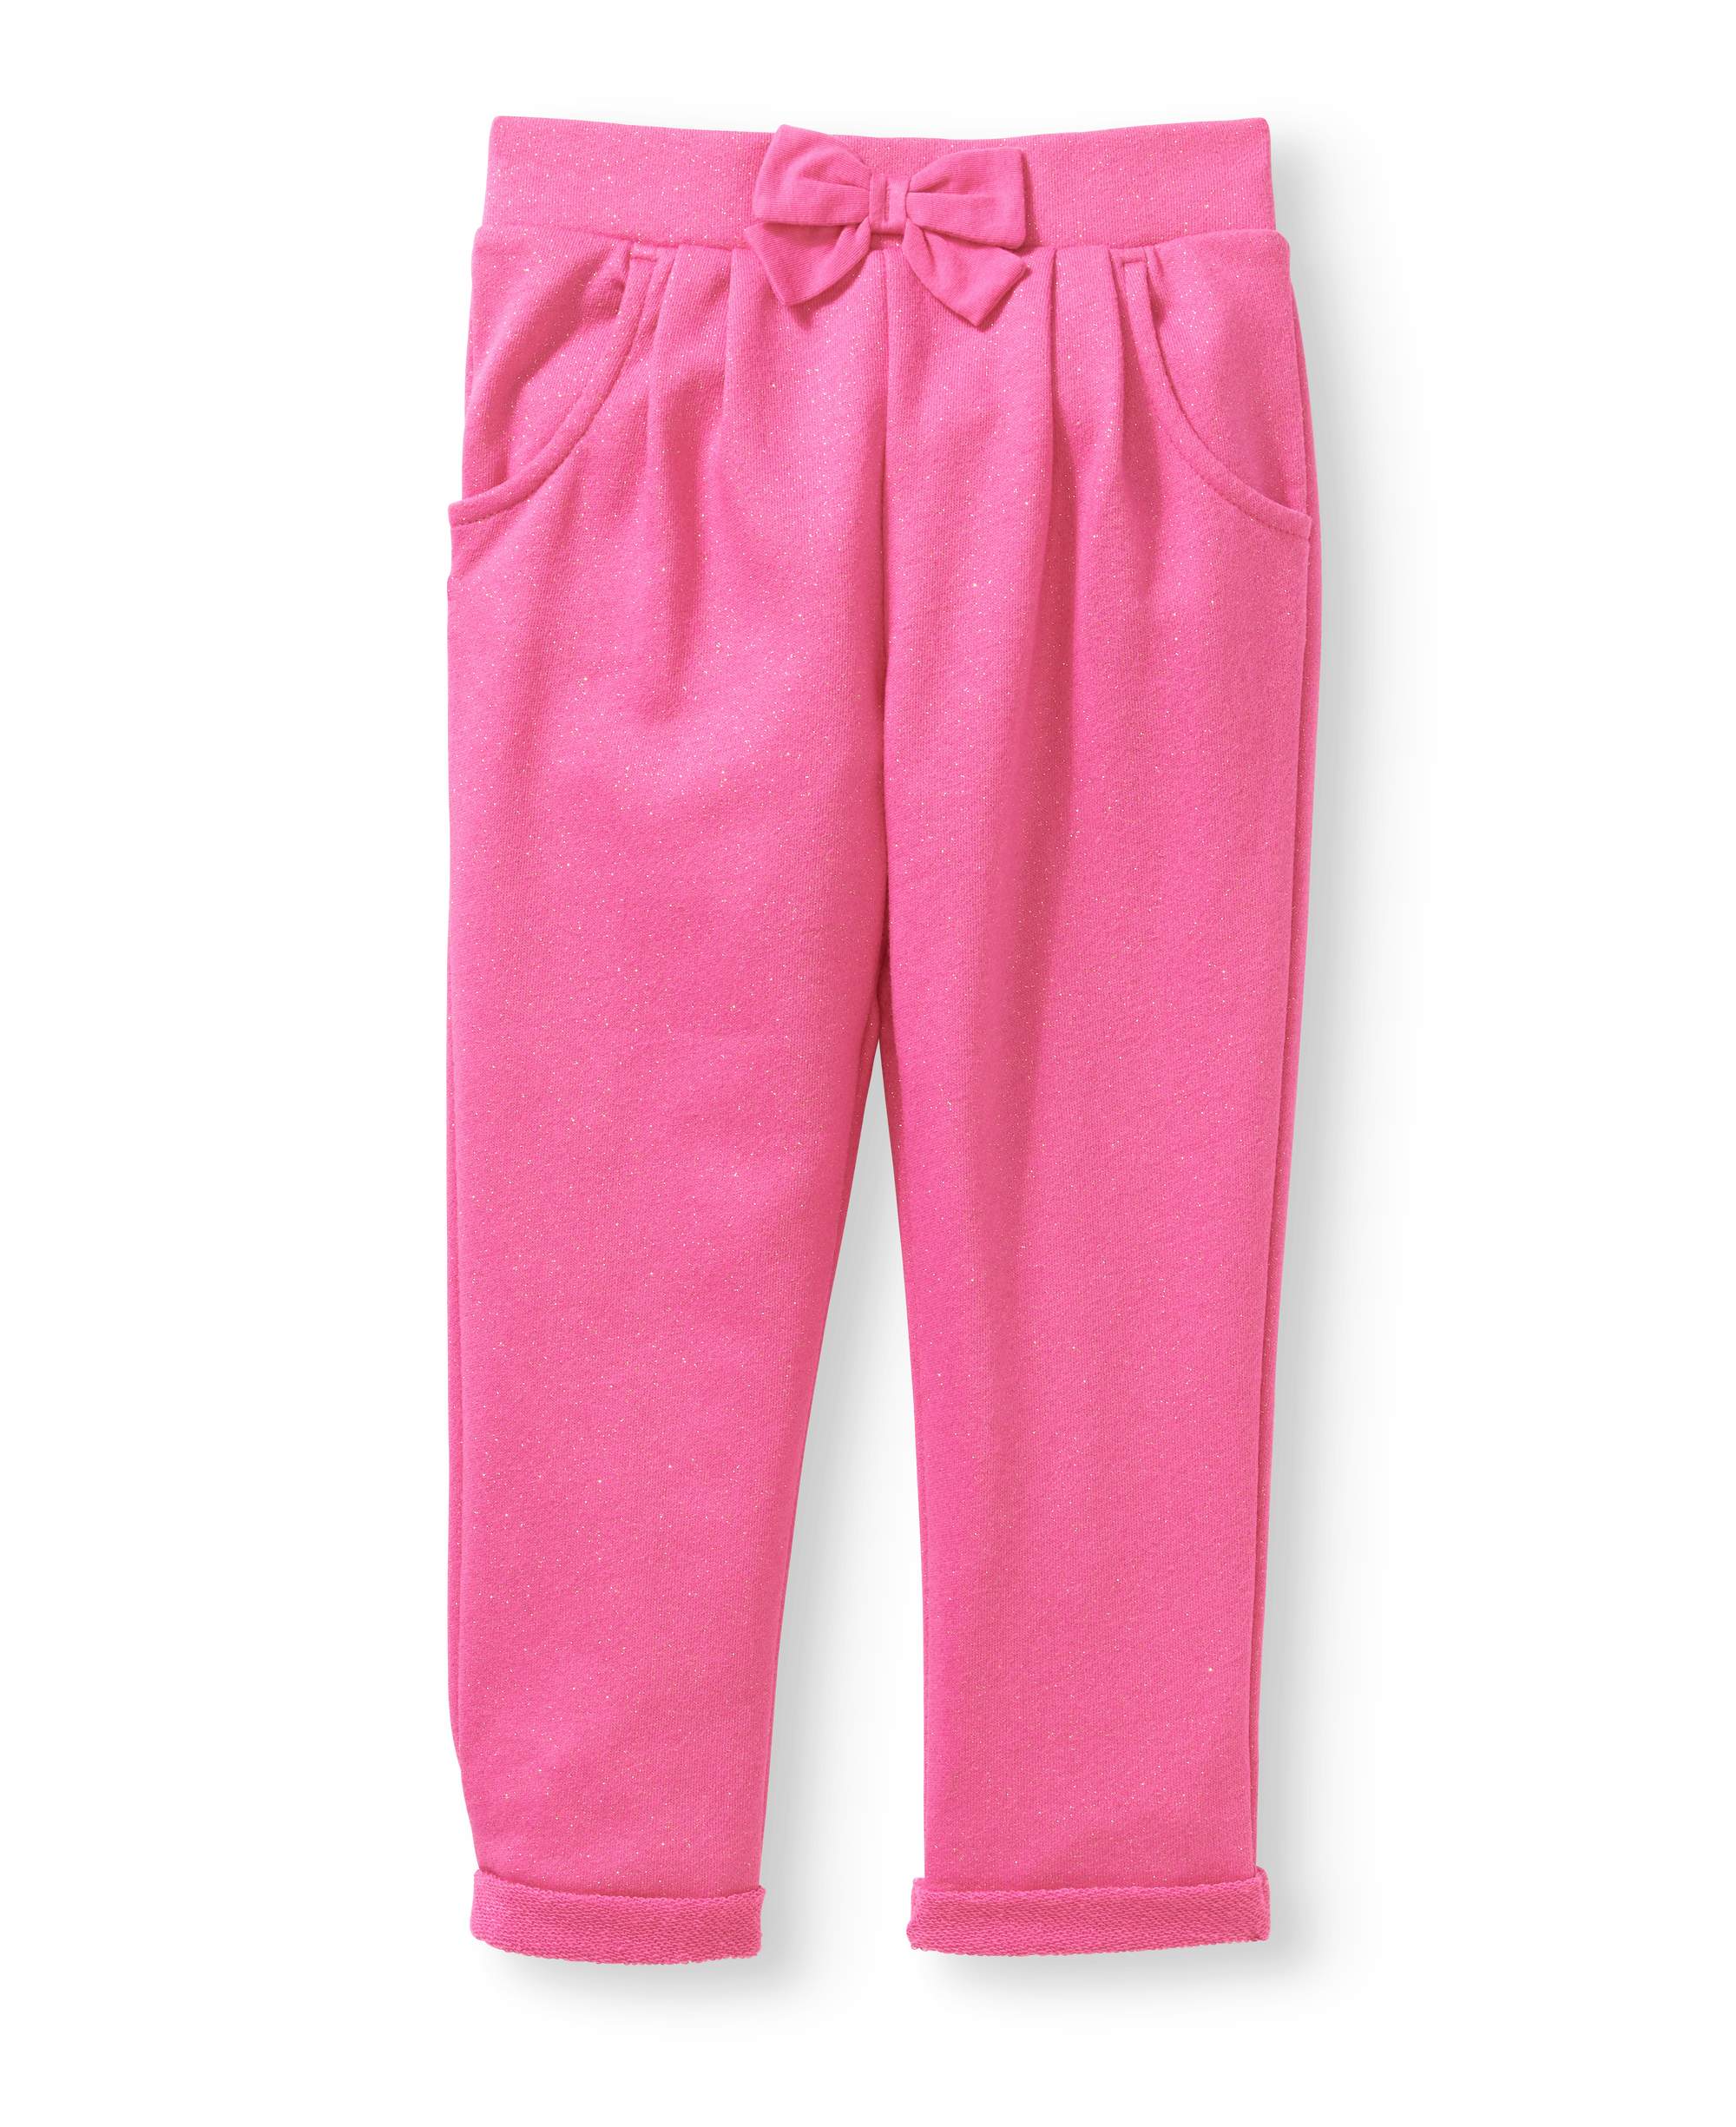 Baby Toddler Girls' French Terry Jogger Pants - image 1 of 2